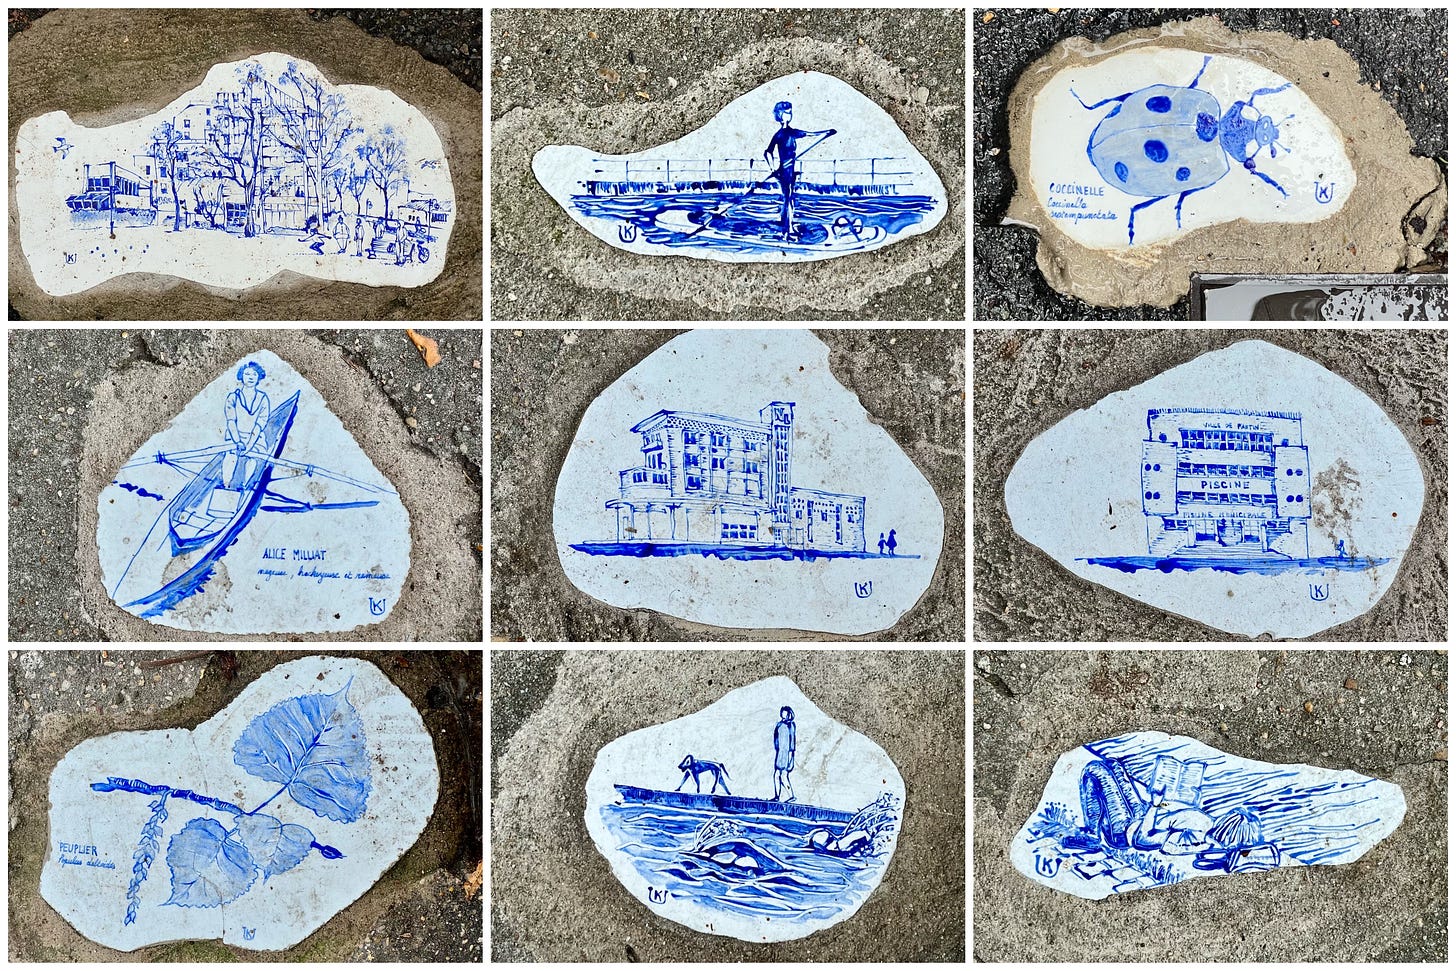 A selection of handpainted tiles in bedded in the streets of Paris.